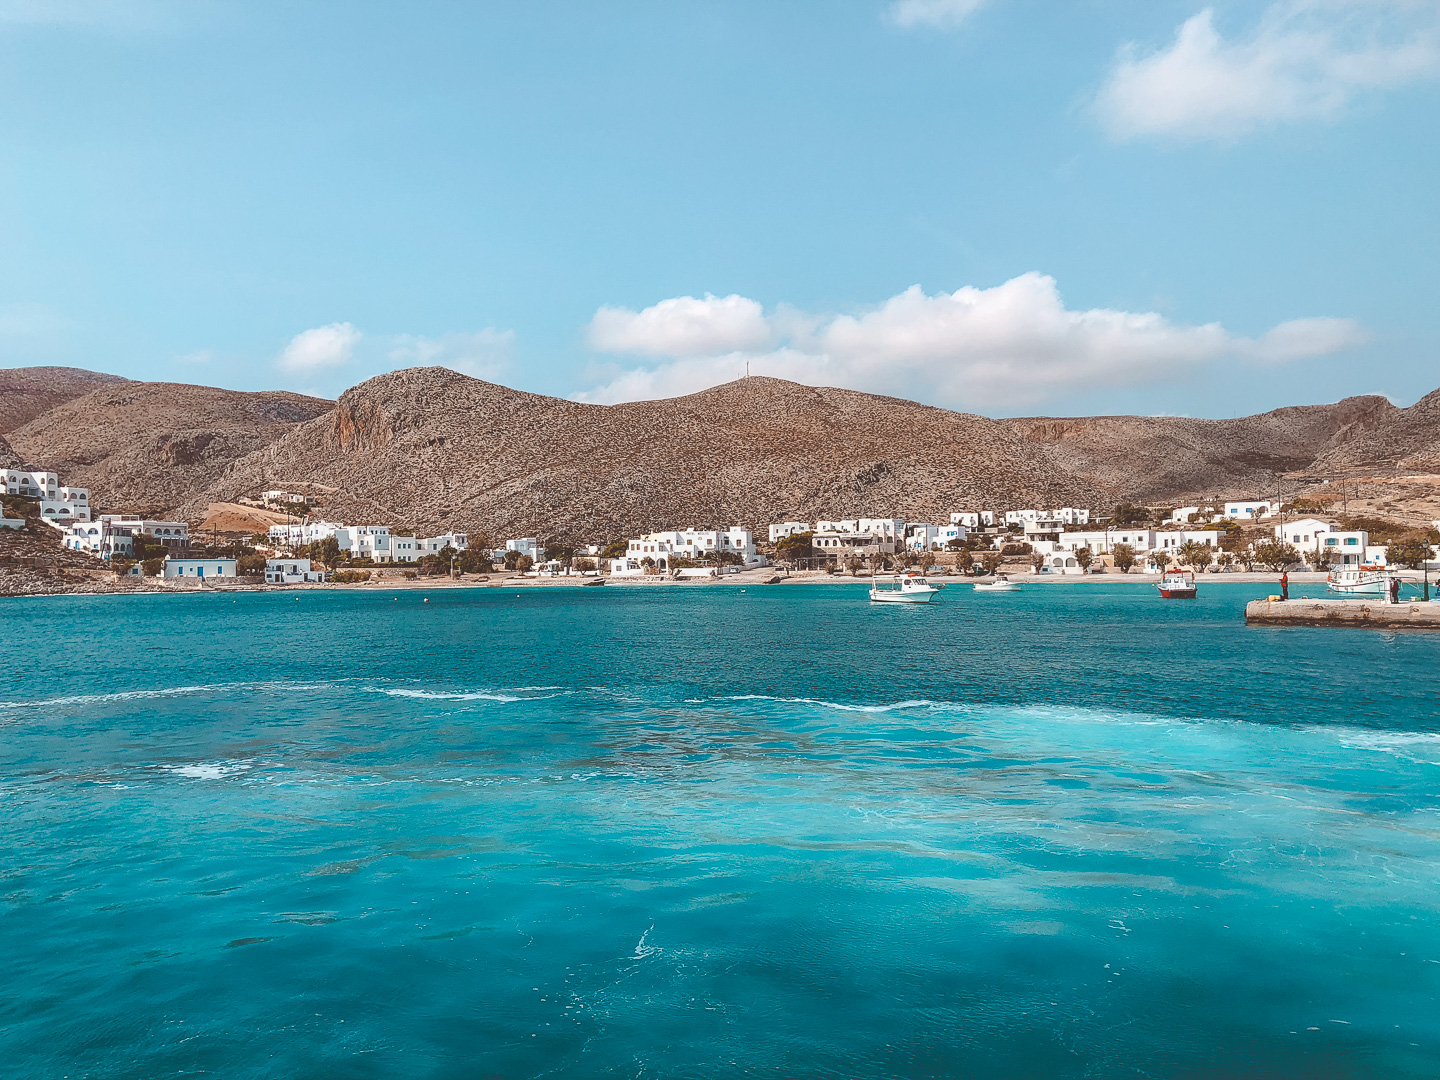 Sailing away from the Greek Island of Naxos on a speed ferry and admiring all the boats and white houses along the cliffs. 